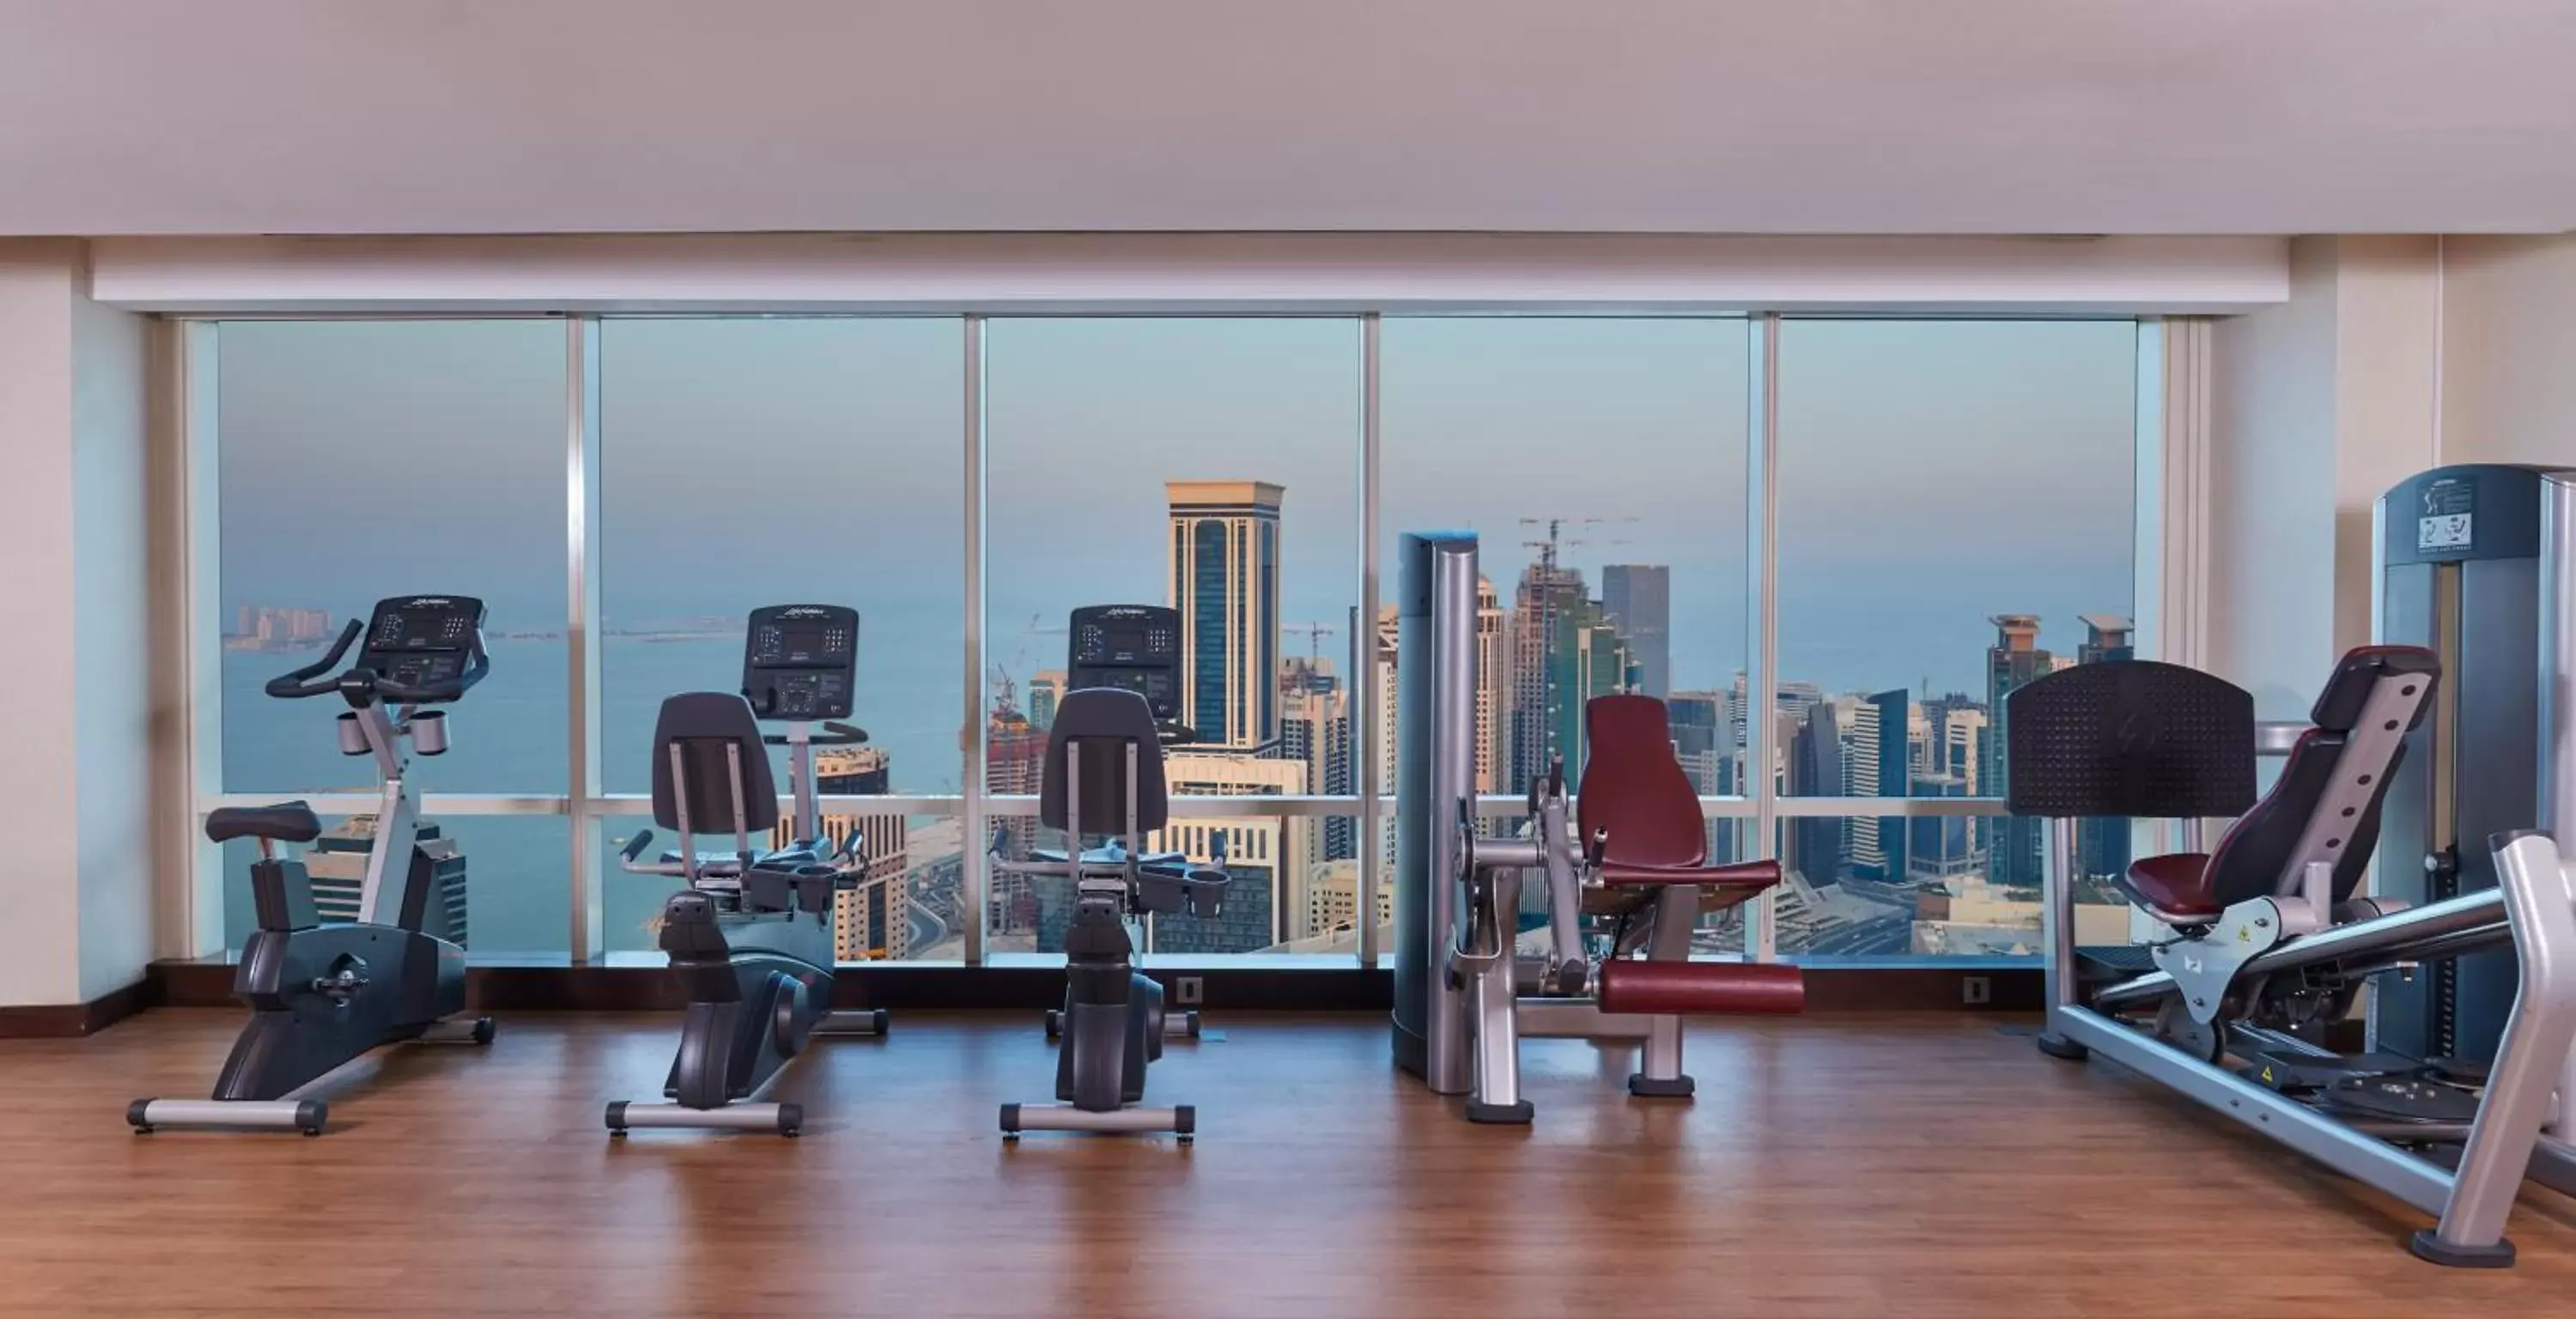 Fitness centre/facilities, Fitness Center/Facilities in InterContinental Doha The City, an IHG Hotel